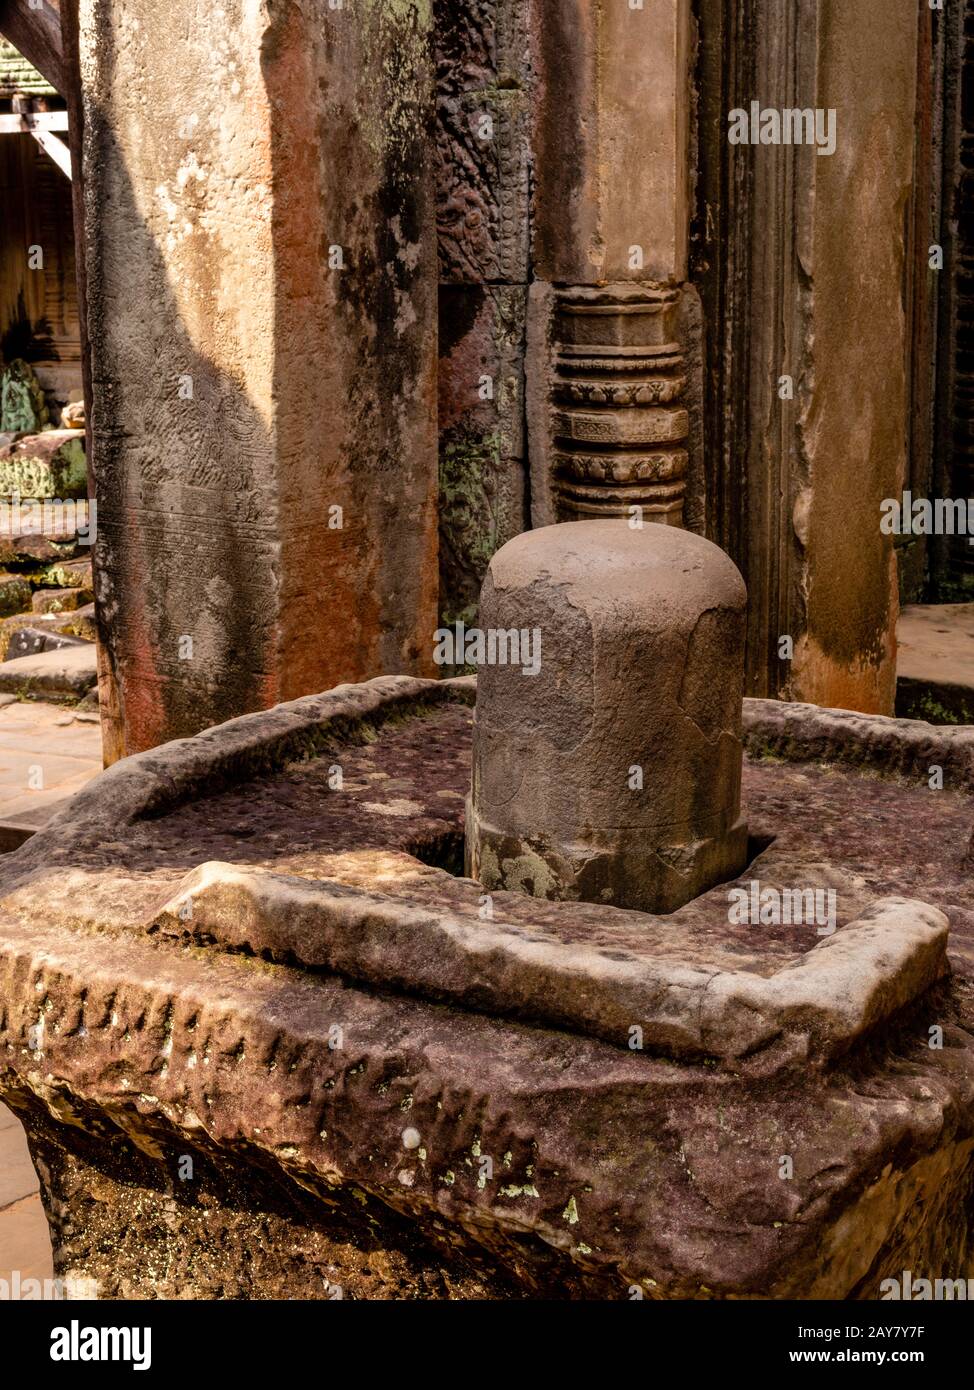 Image from Preaha Khan temple, a part of the Angkor Wat Archeological Park, Siem Reap, Cambodia. Stock Photo